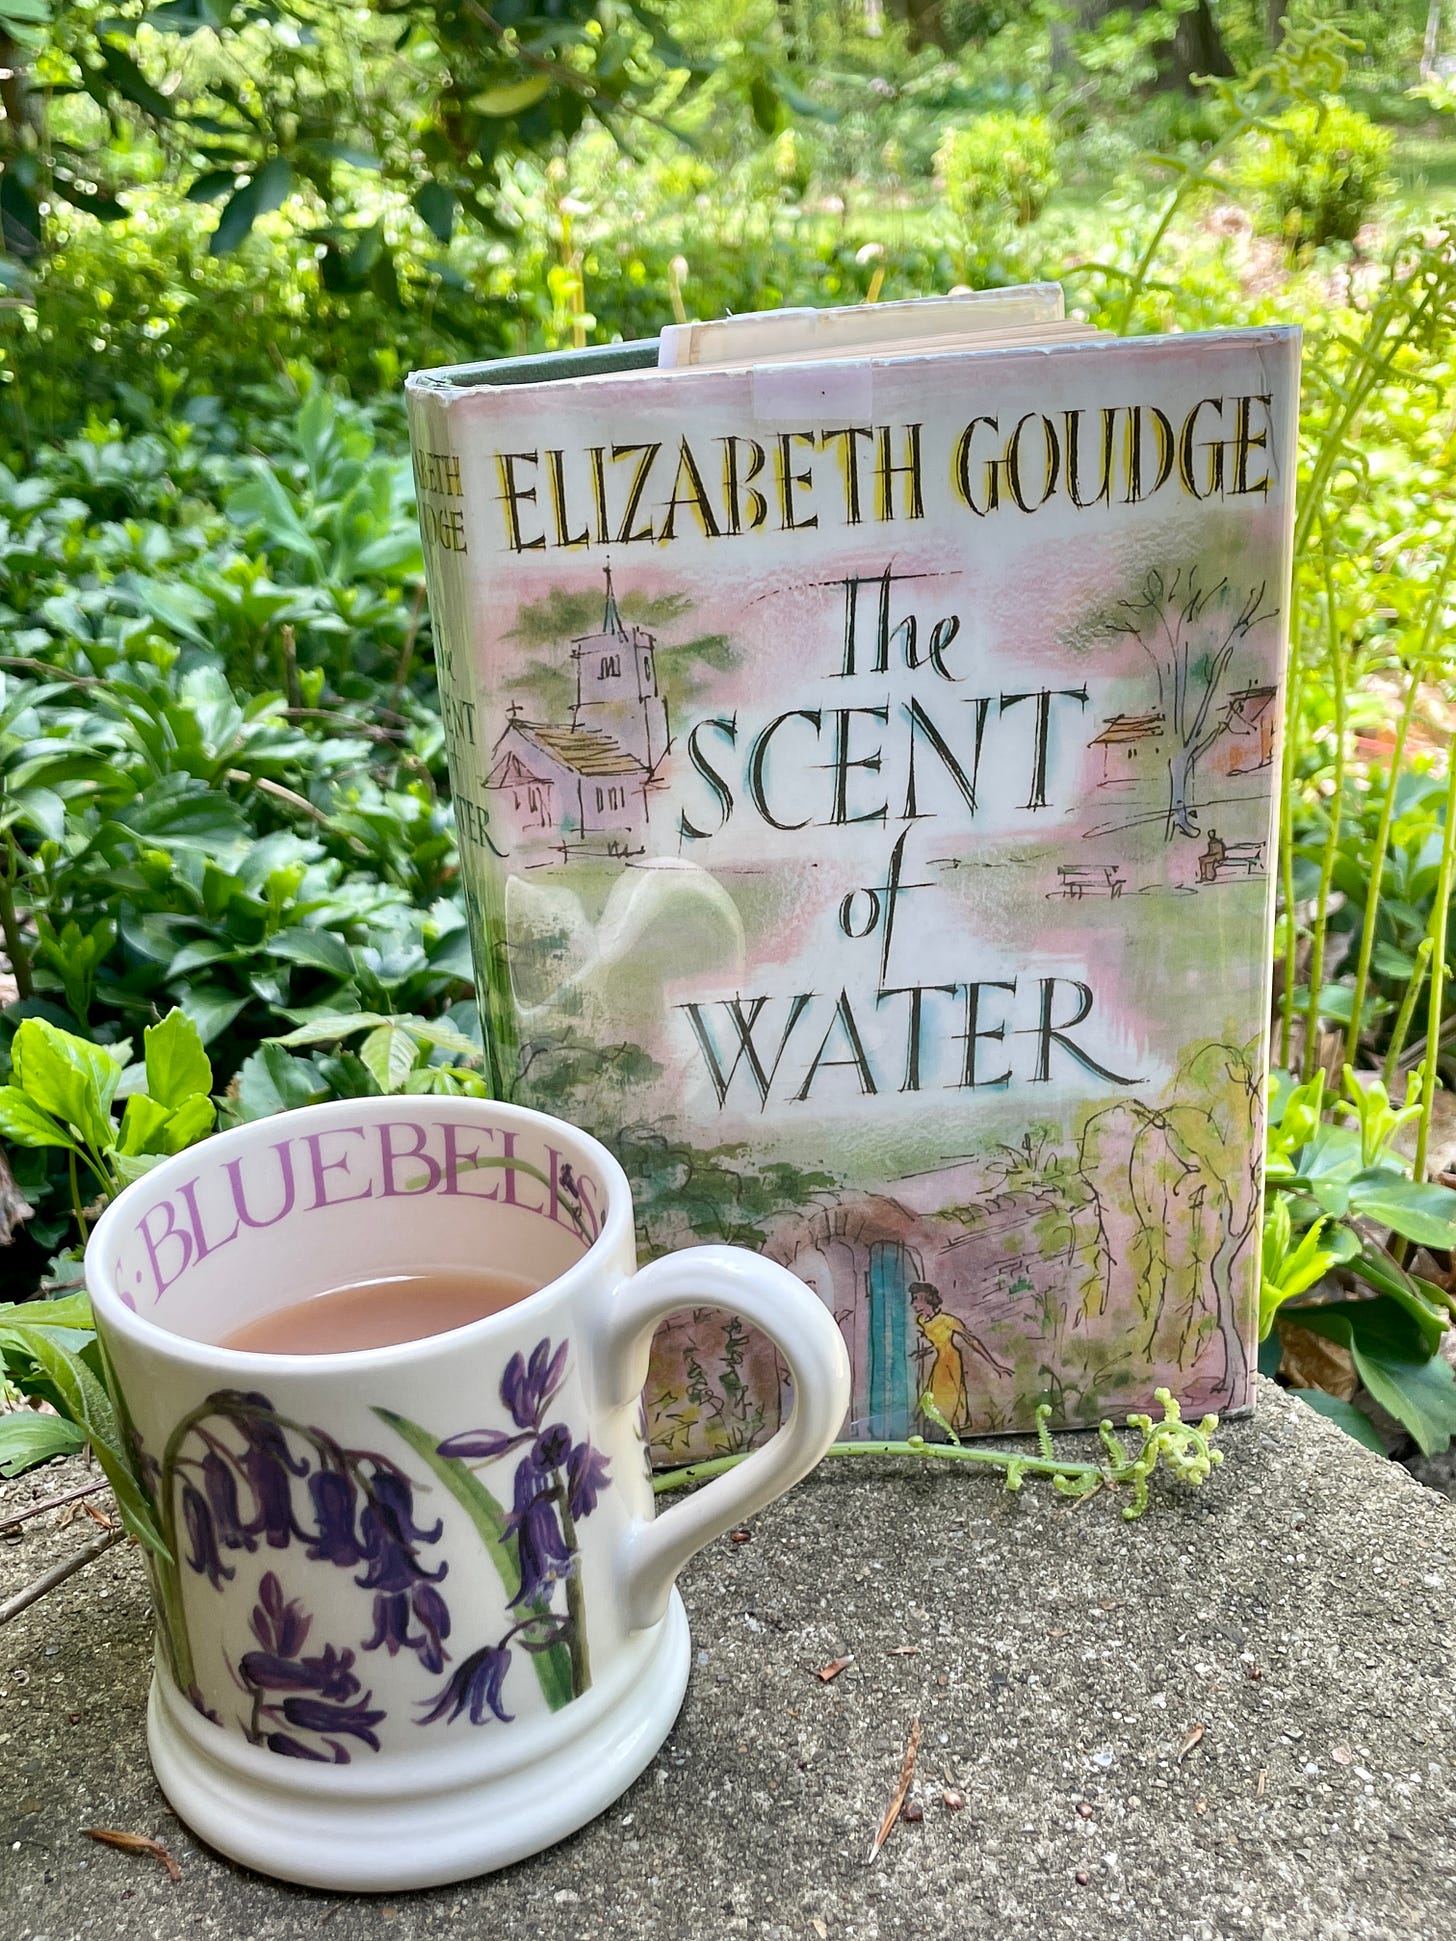 The Scent of Water by Elizabeth Goudge on my front step with my tea this morning. 